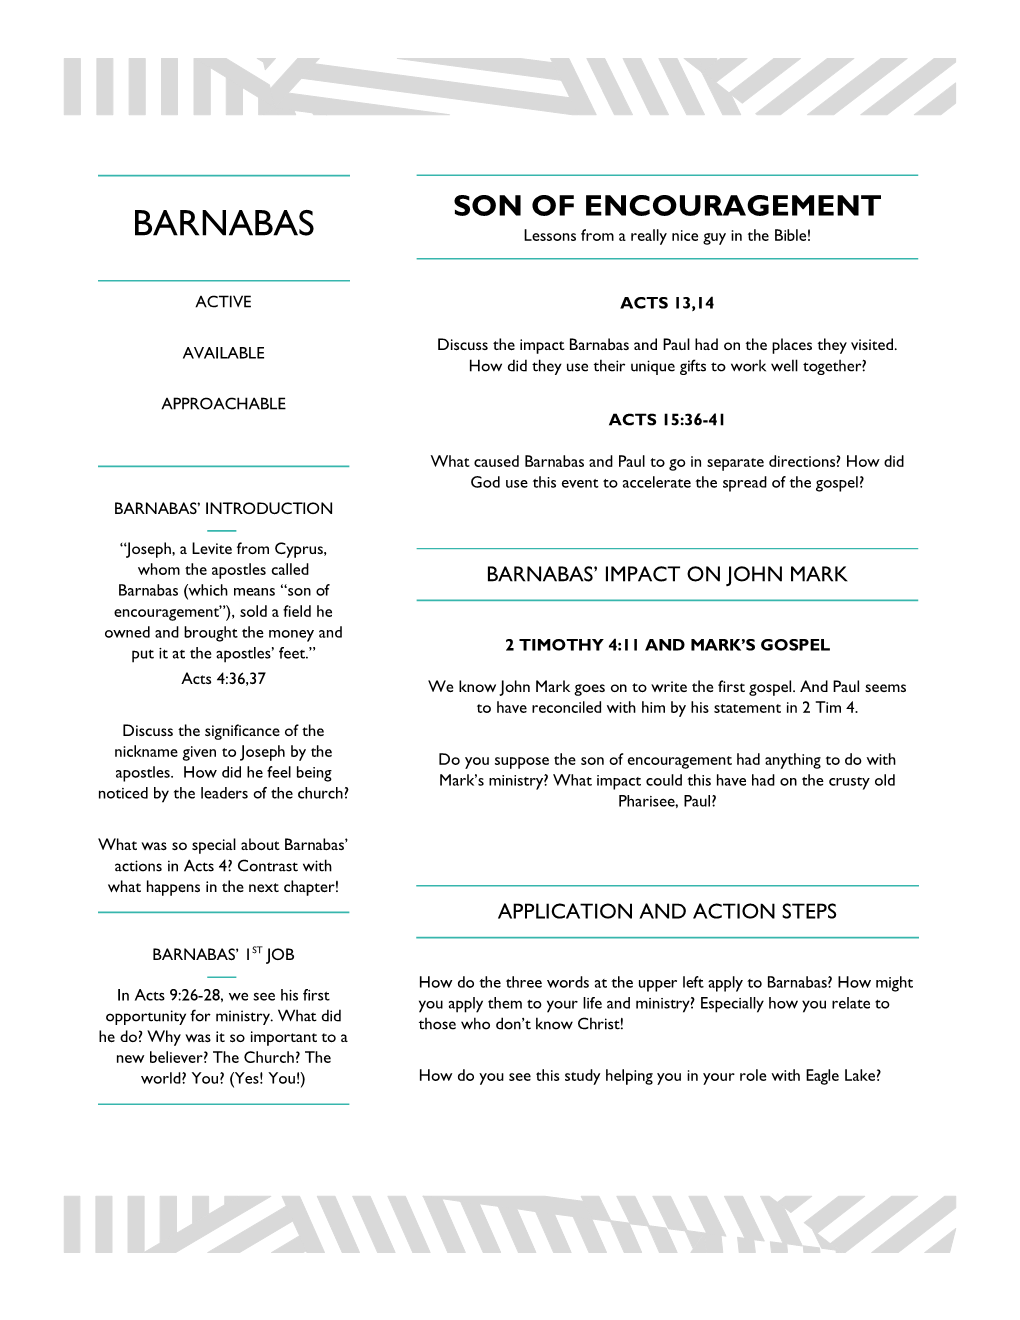 BARNABAS Lessons from a Really Nice Guy in the Bible!